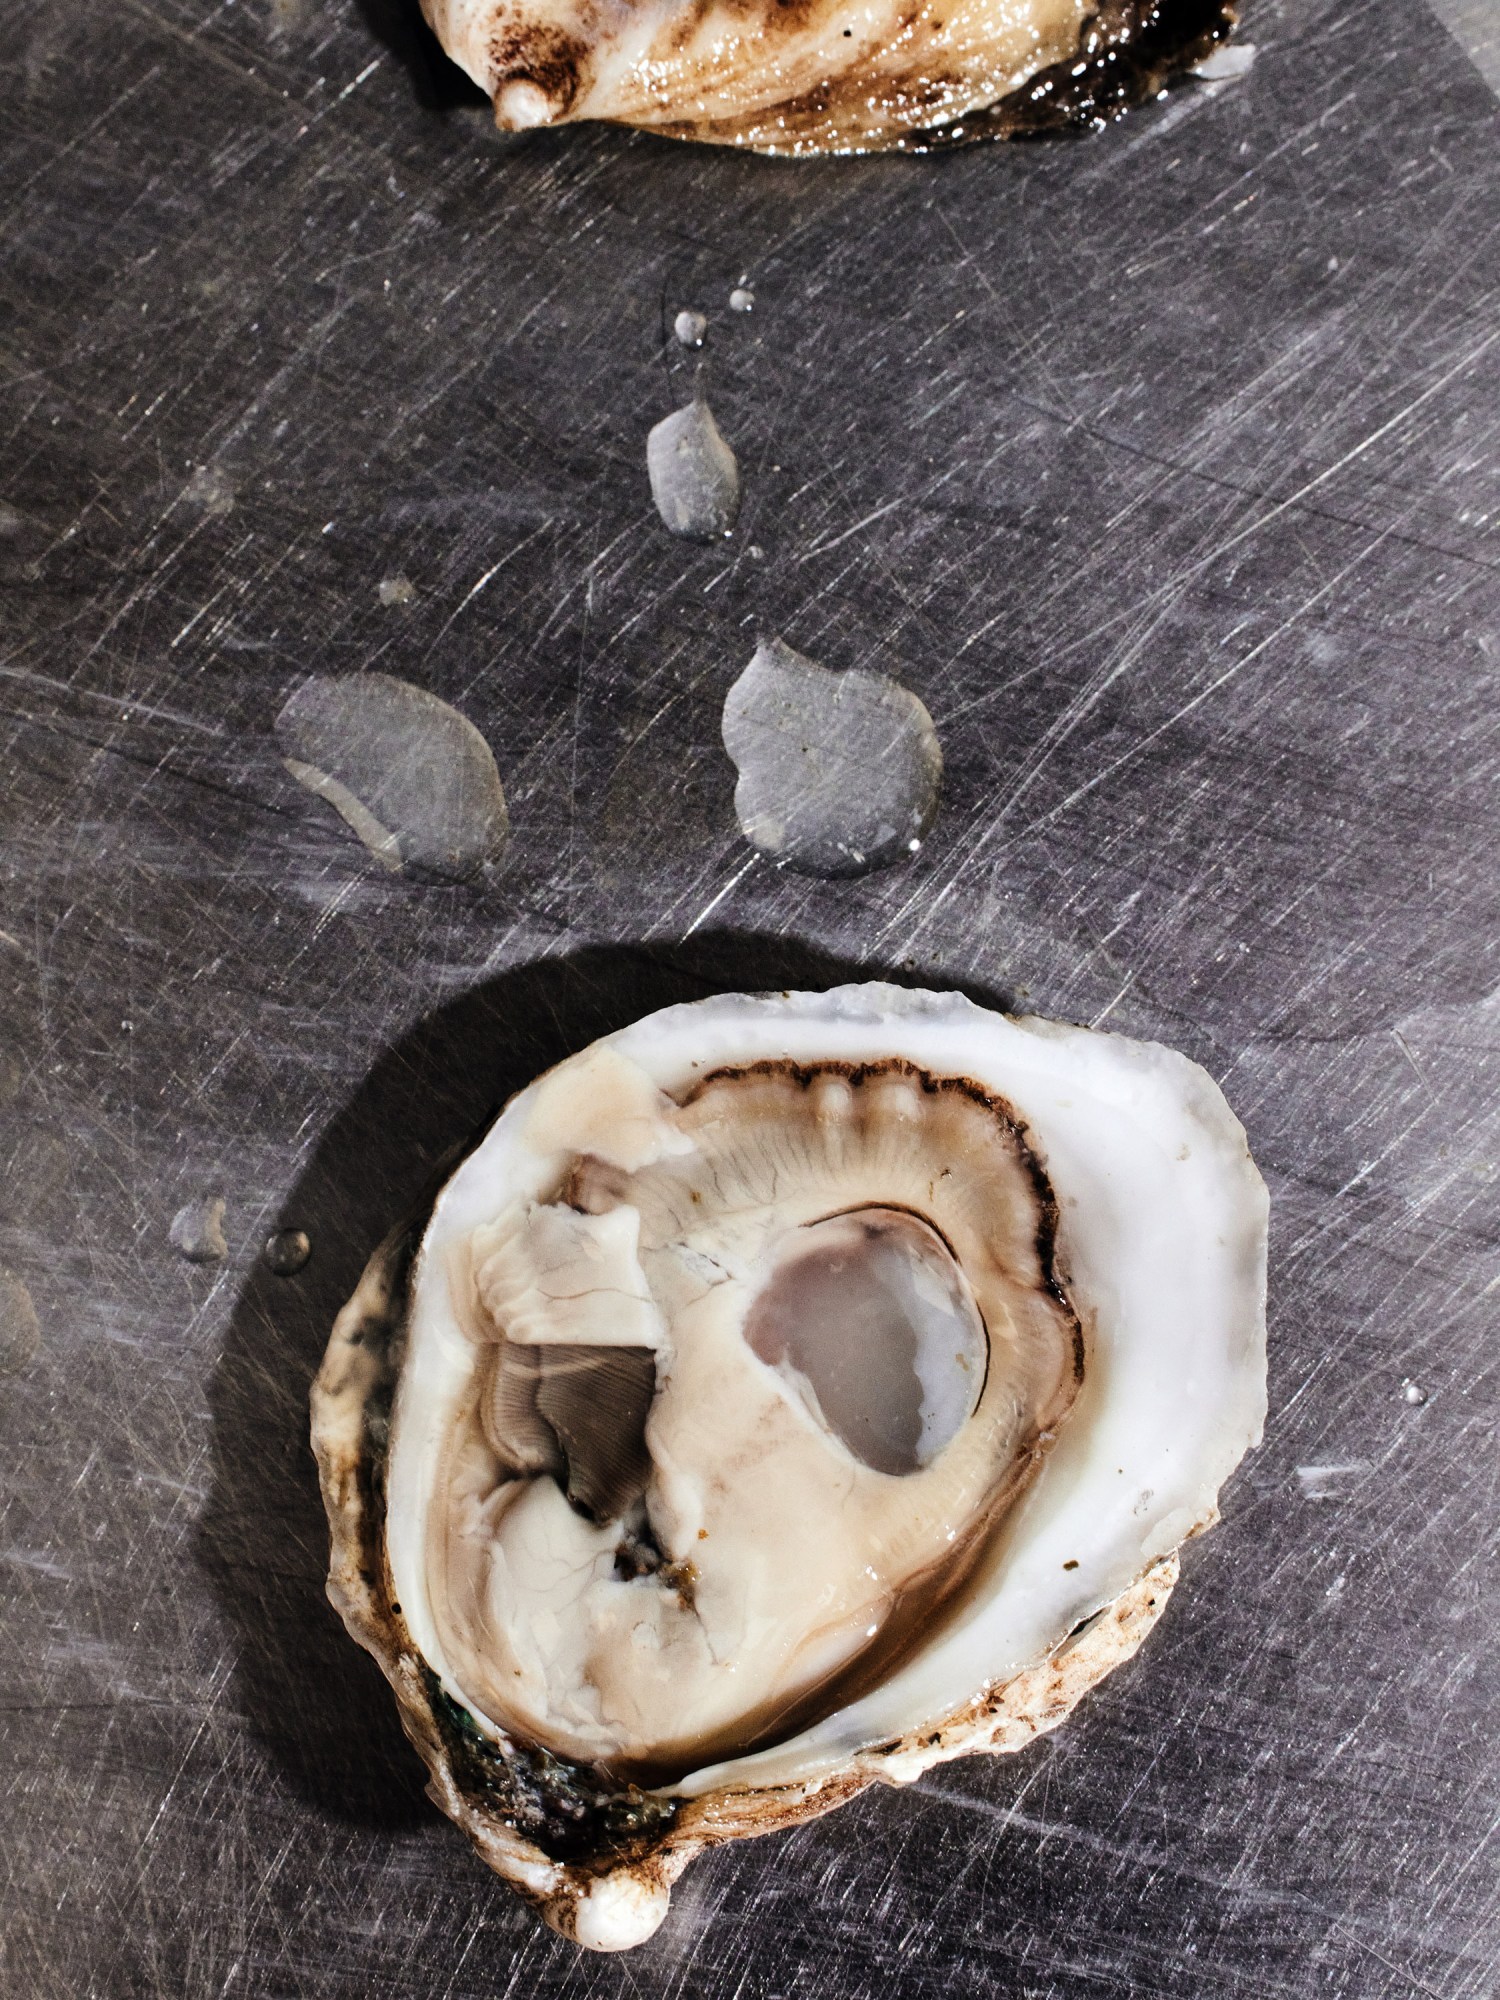 a single oyster on the half shell on a stainless steel worktop